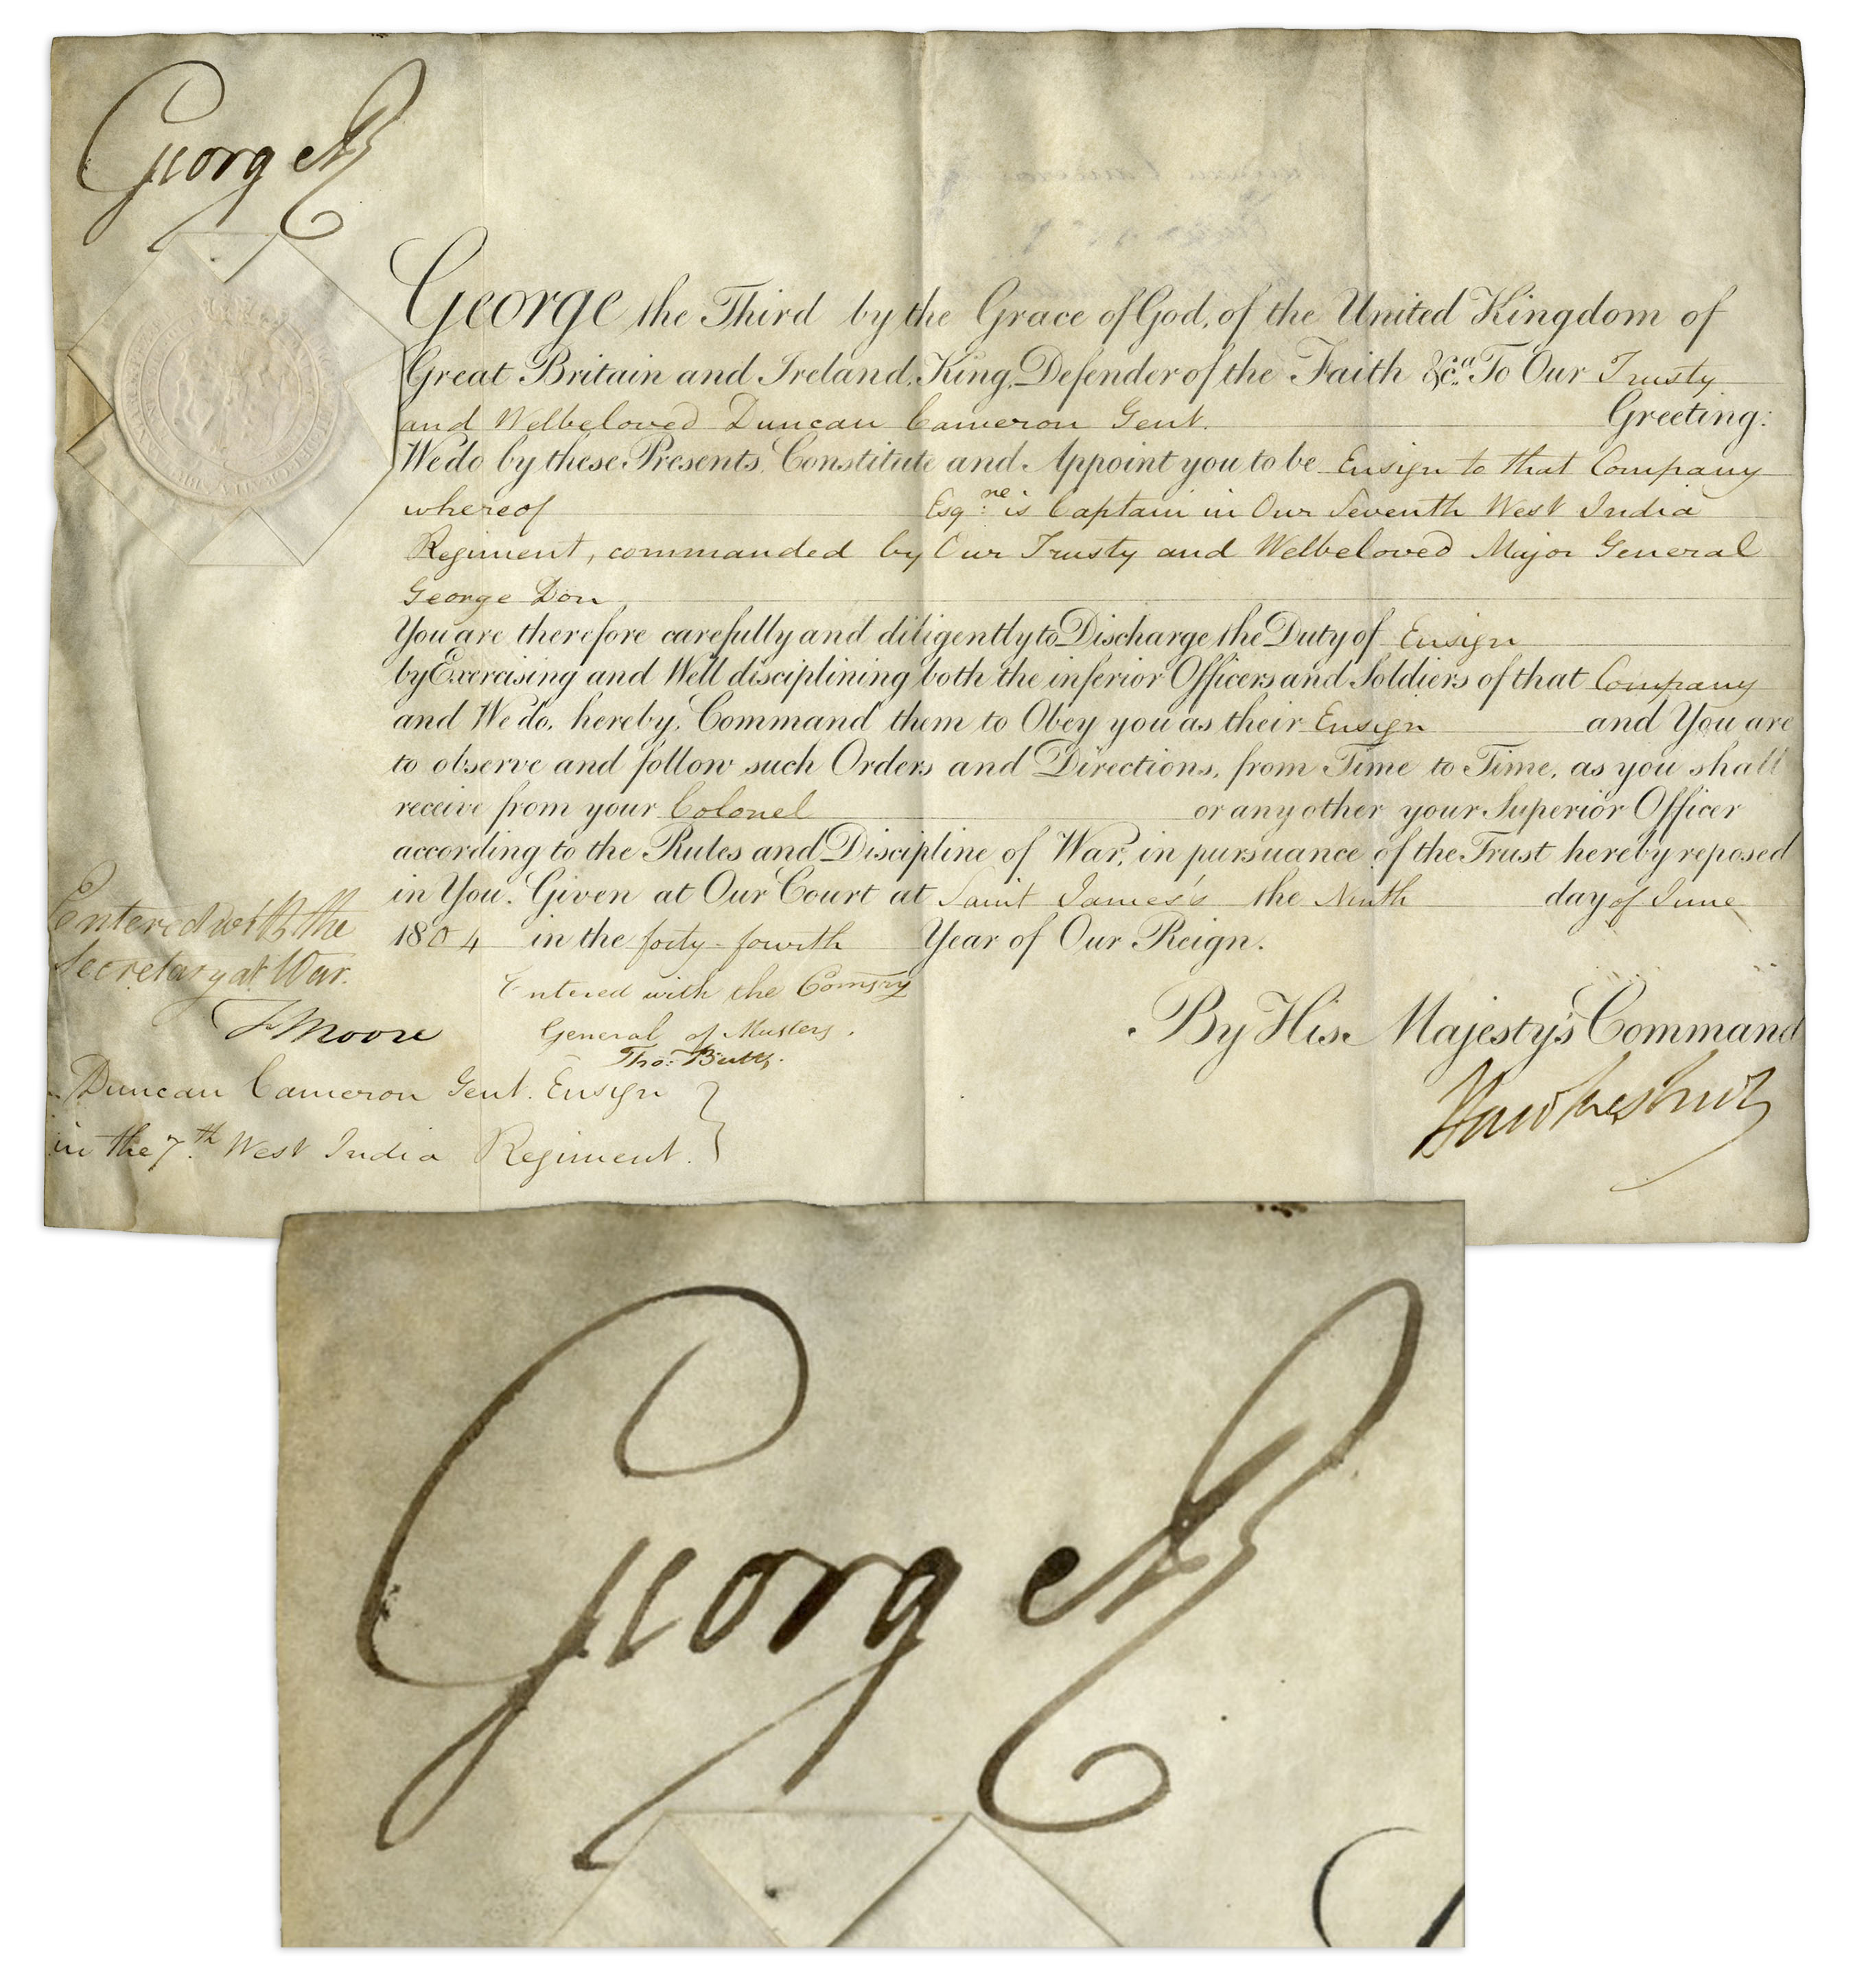 King George III Signed Military Commission From 1804 King George III signed military commission